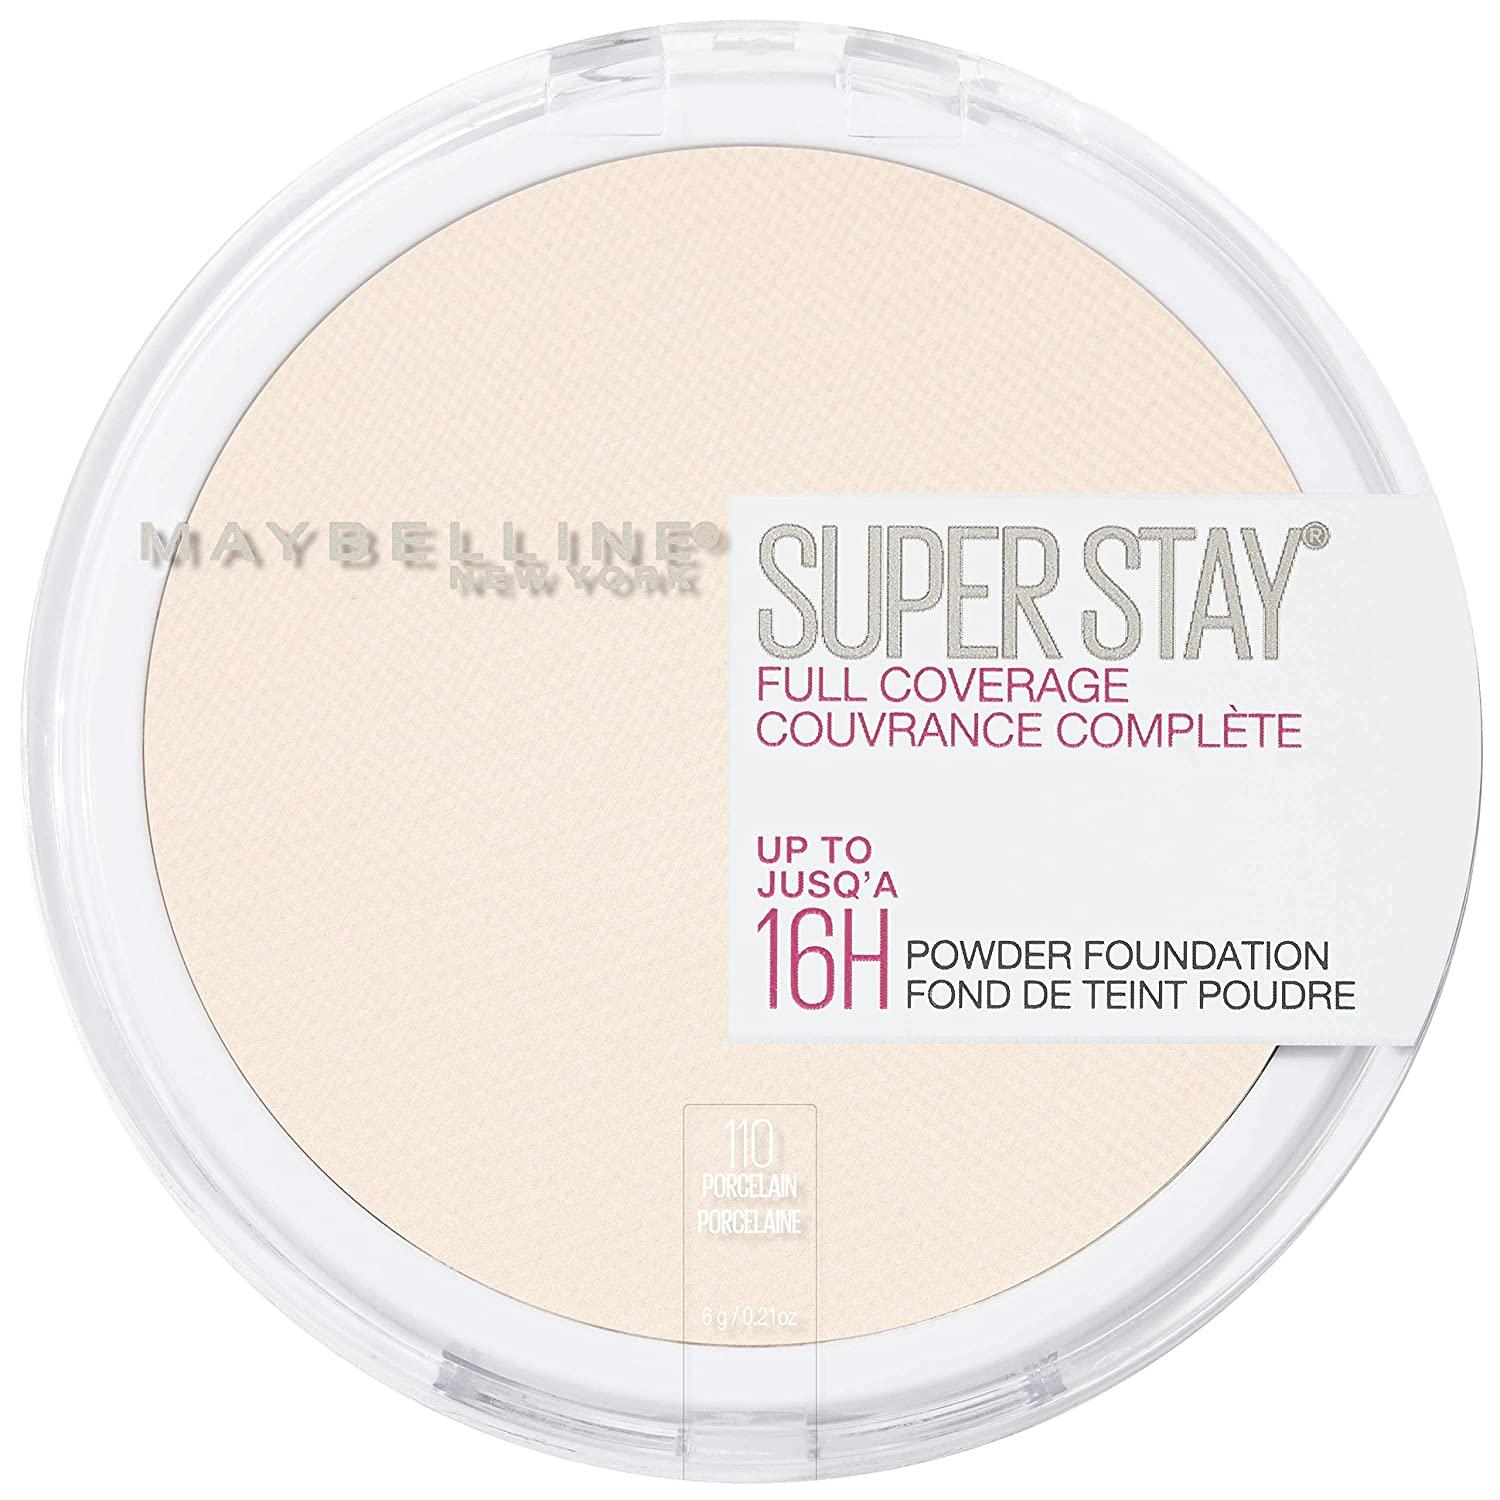 Maybelline New York Super Stay Powder Foundation Makeup for $3.92 Shipped